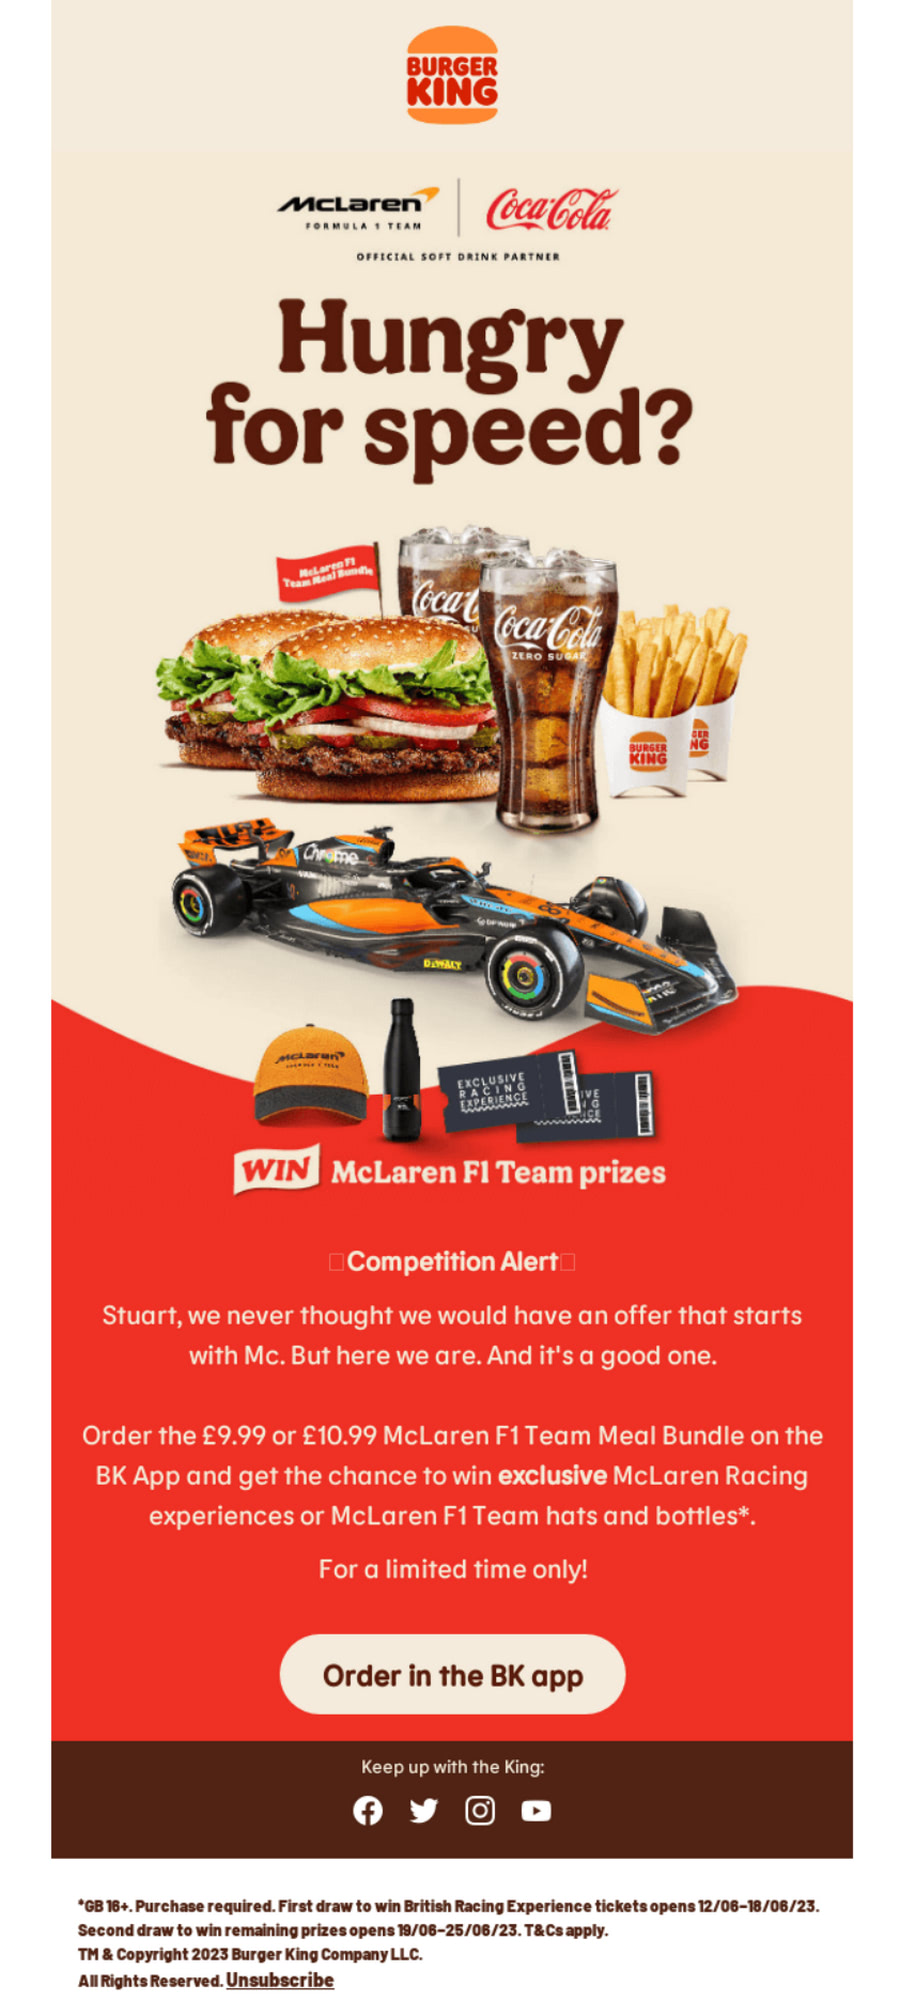 Email from Burger King